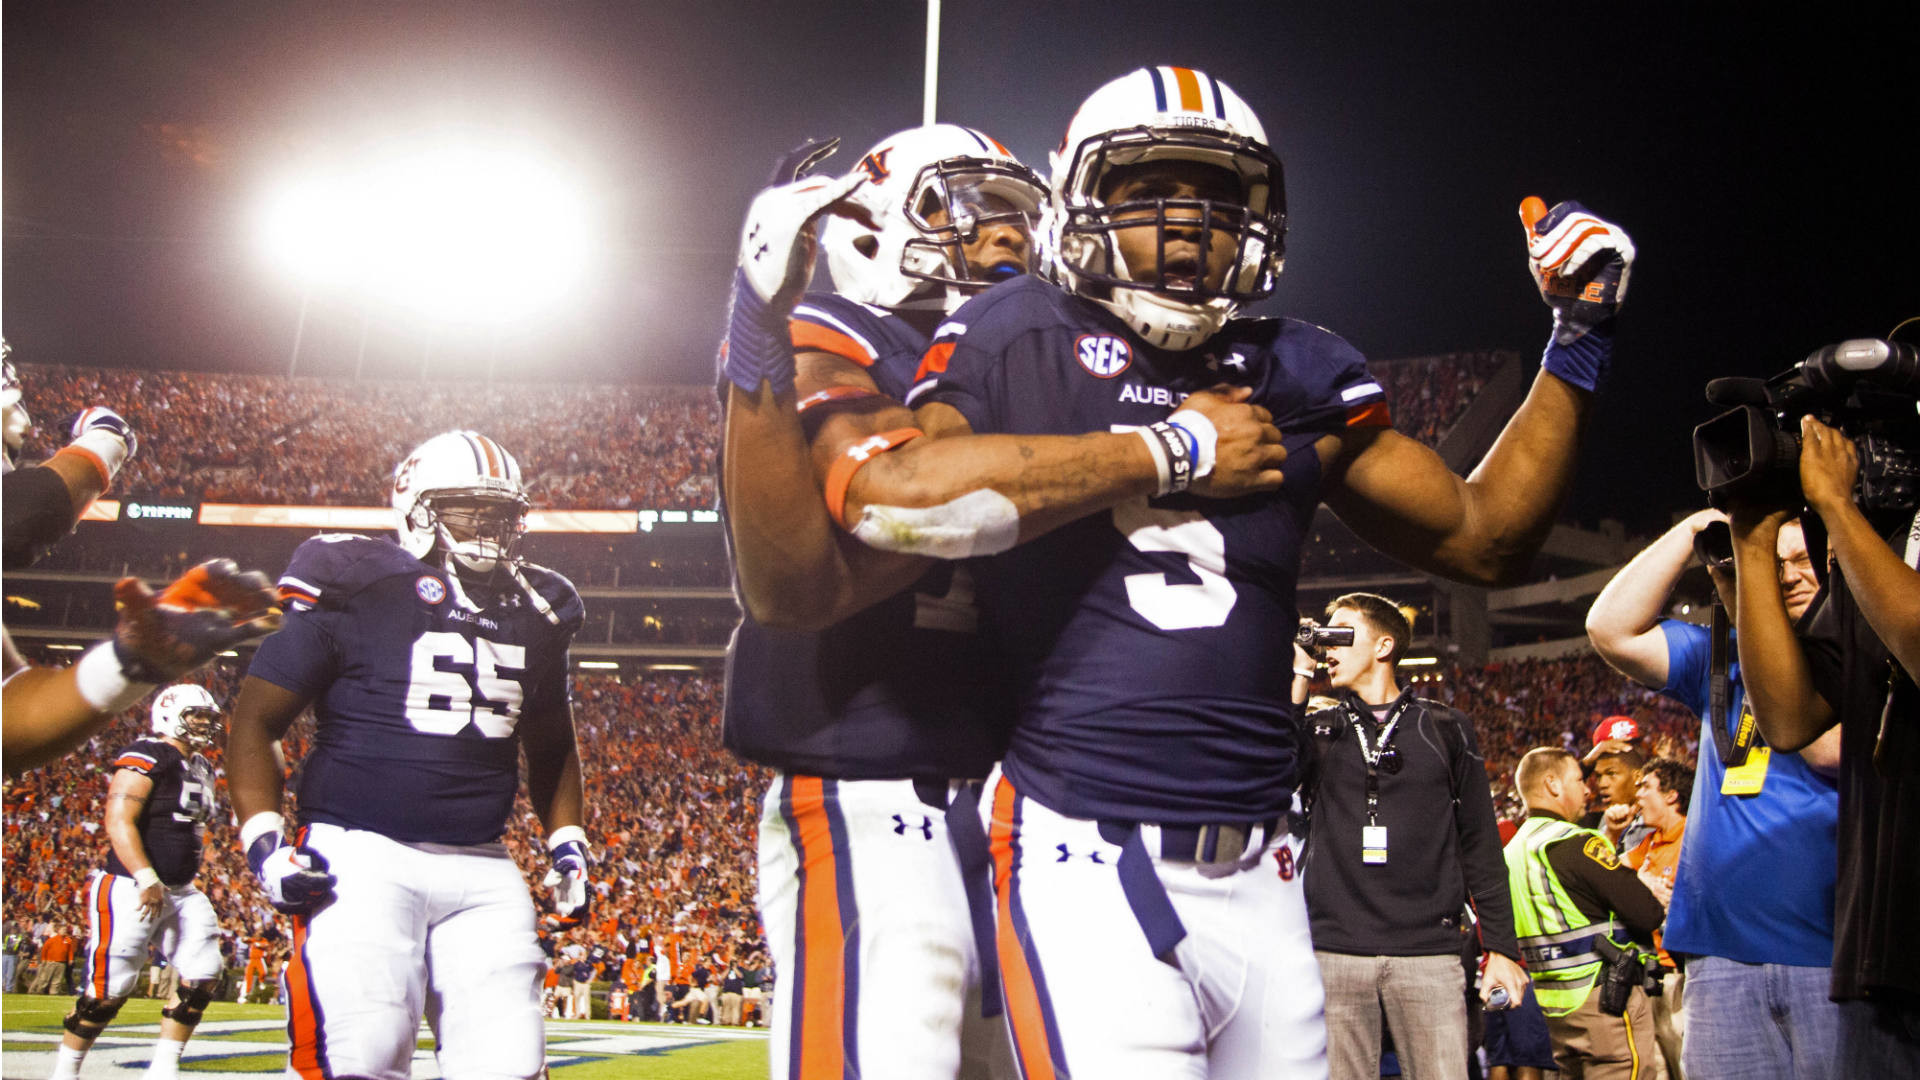 1920x1080 wallpaper.wiki-HD-auburn-football-pictures-PIC-WPC0010881